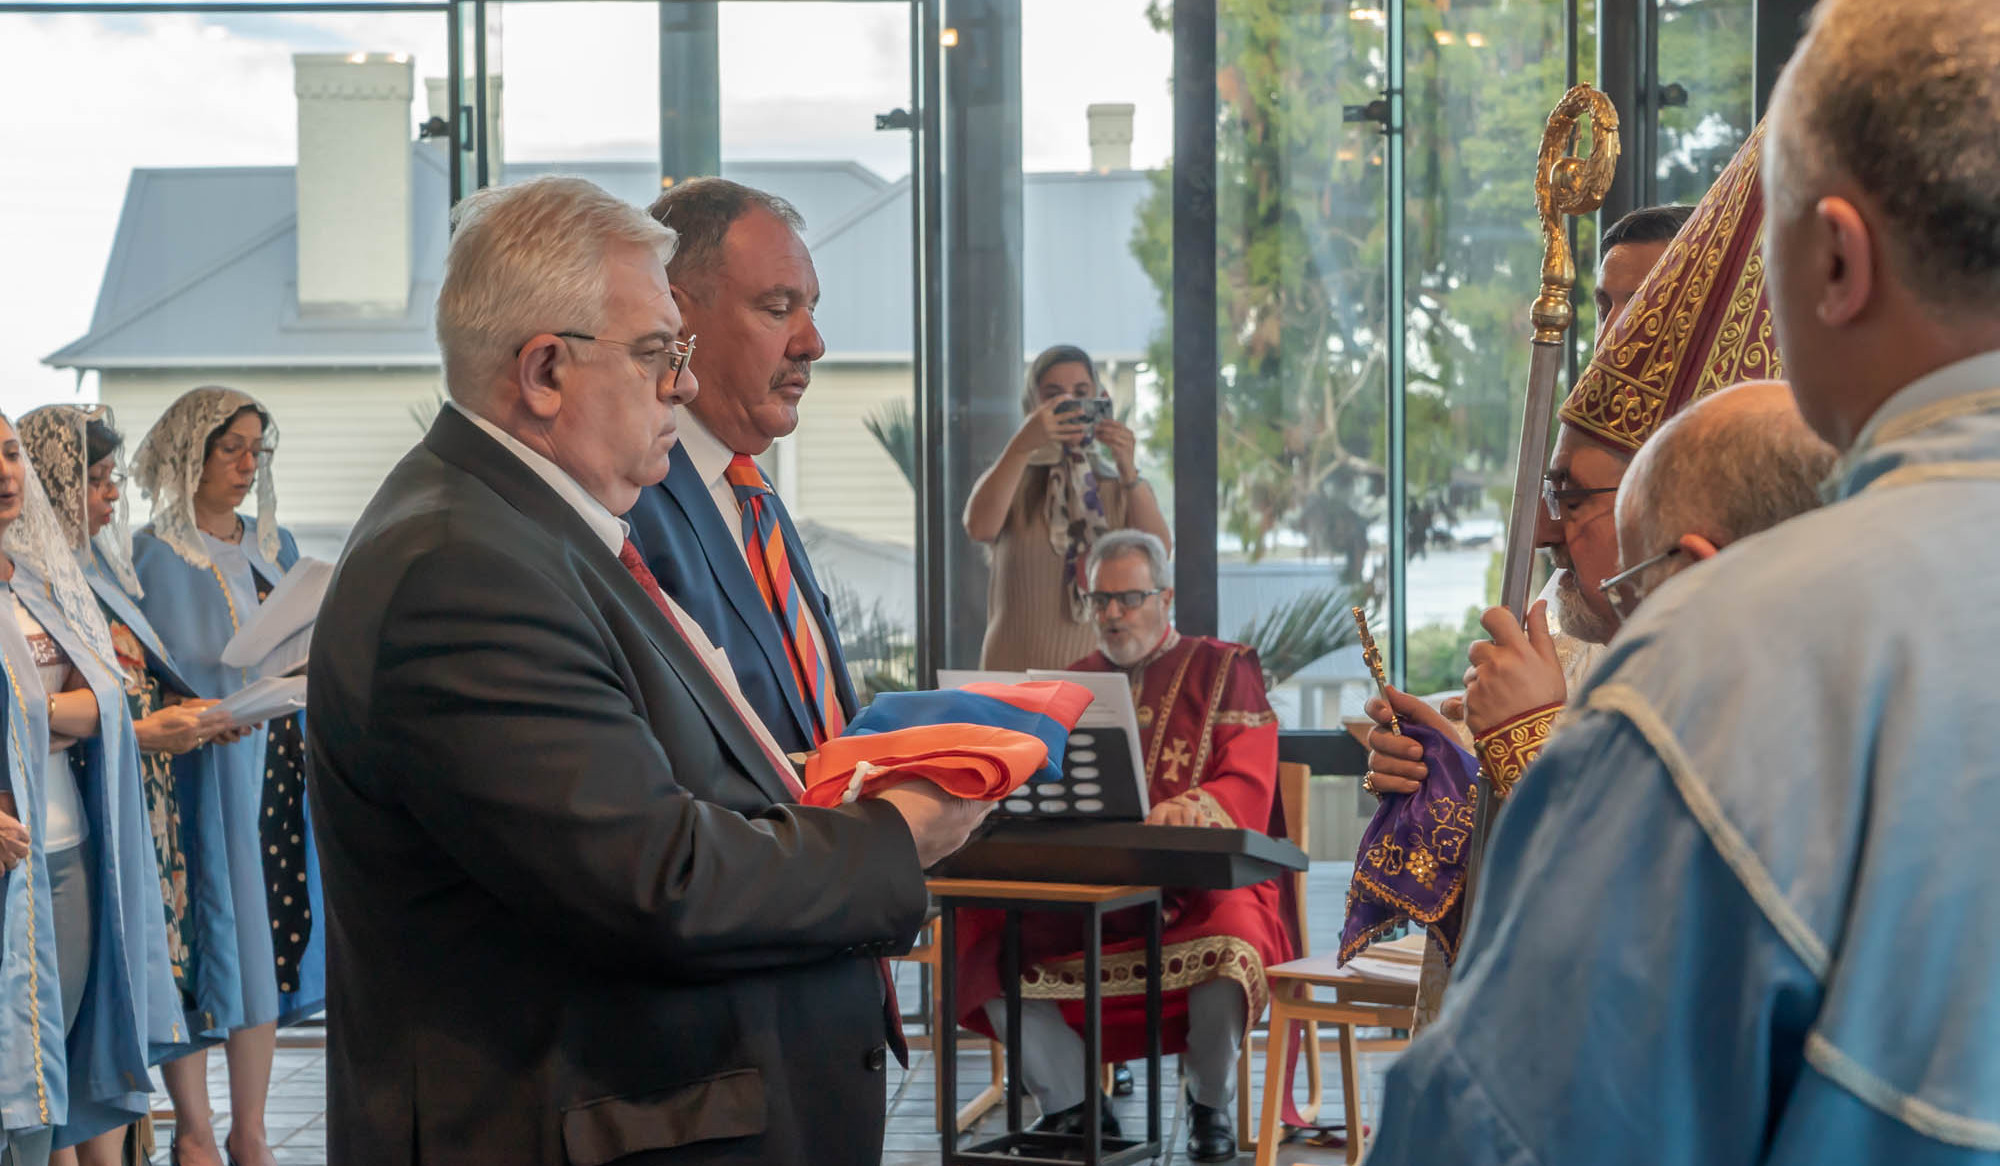 Honorary Consulate of Armenia opened in Auckland